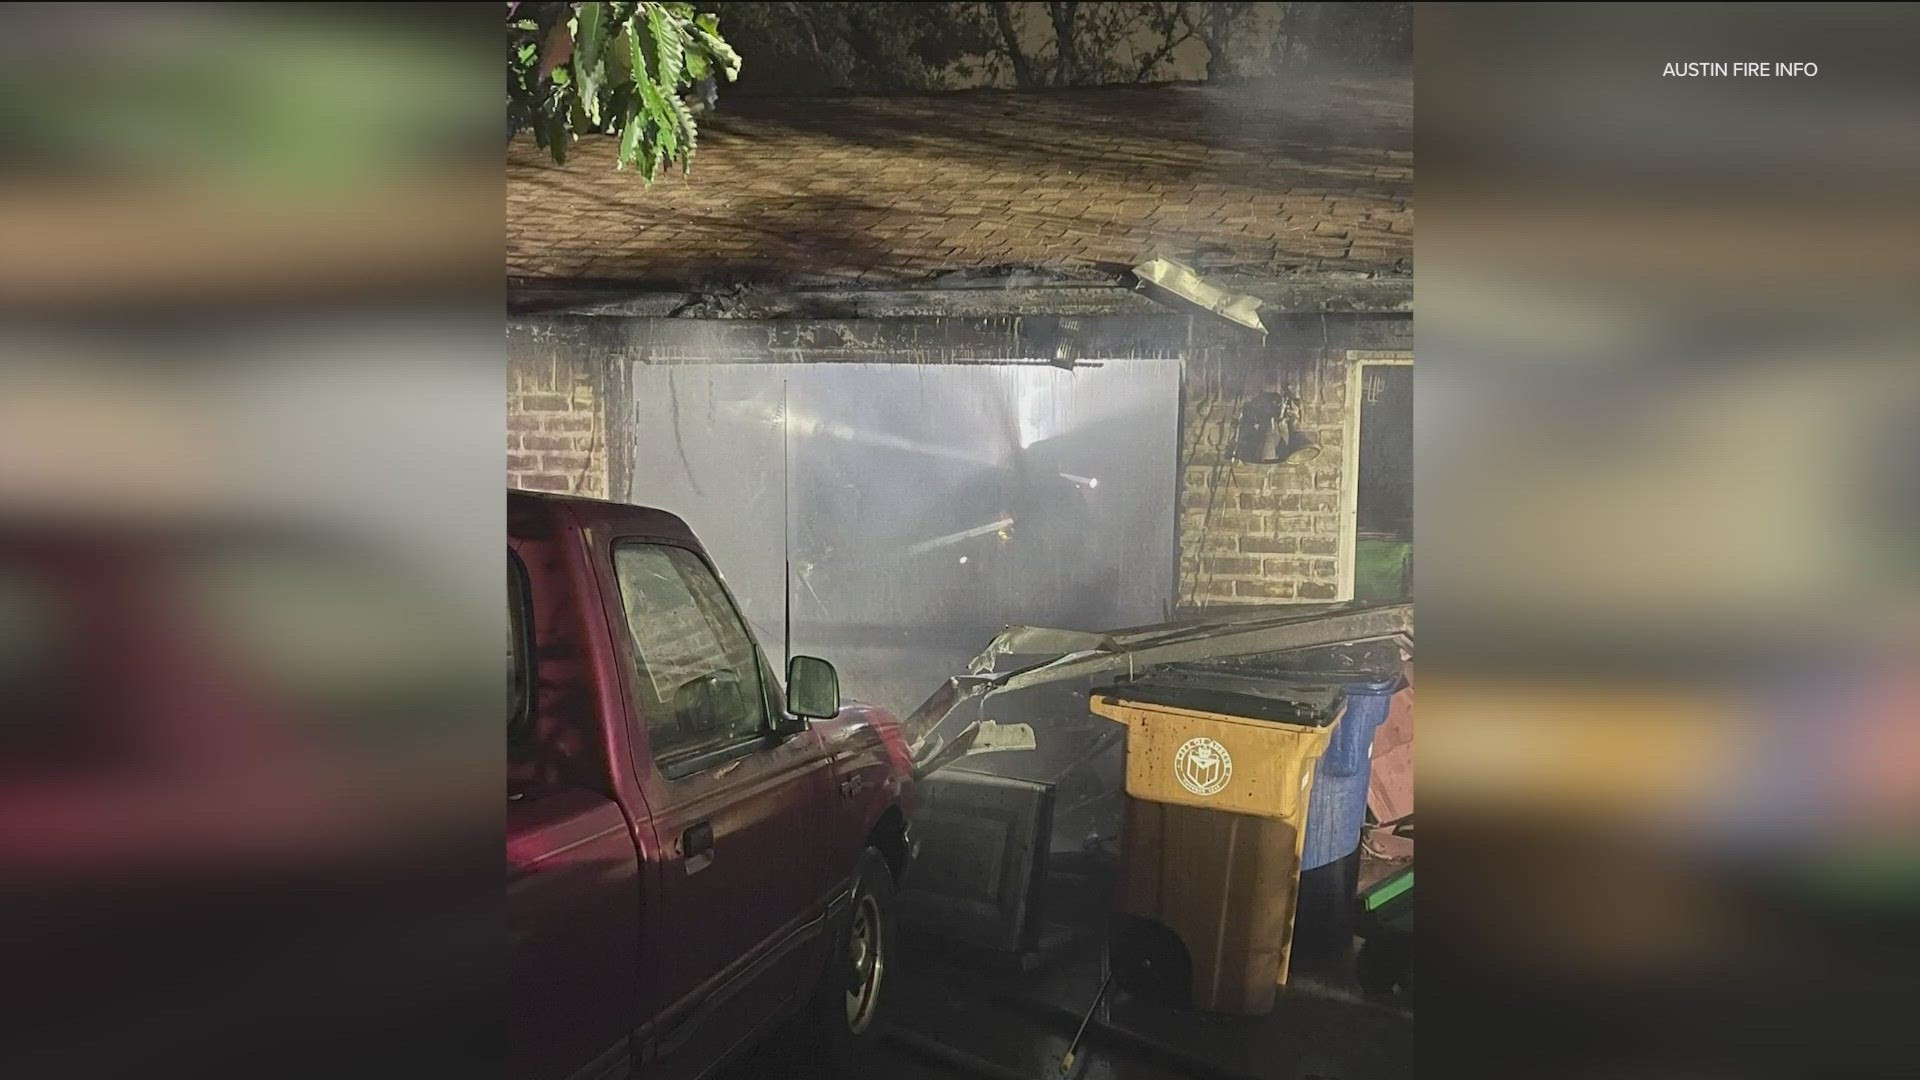 Firefighters responded to a fire in North Austin on Saturday morning.